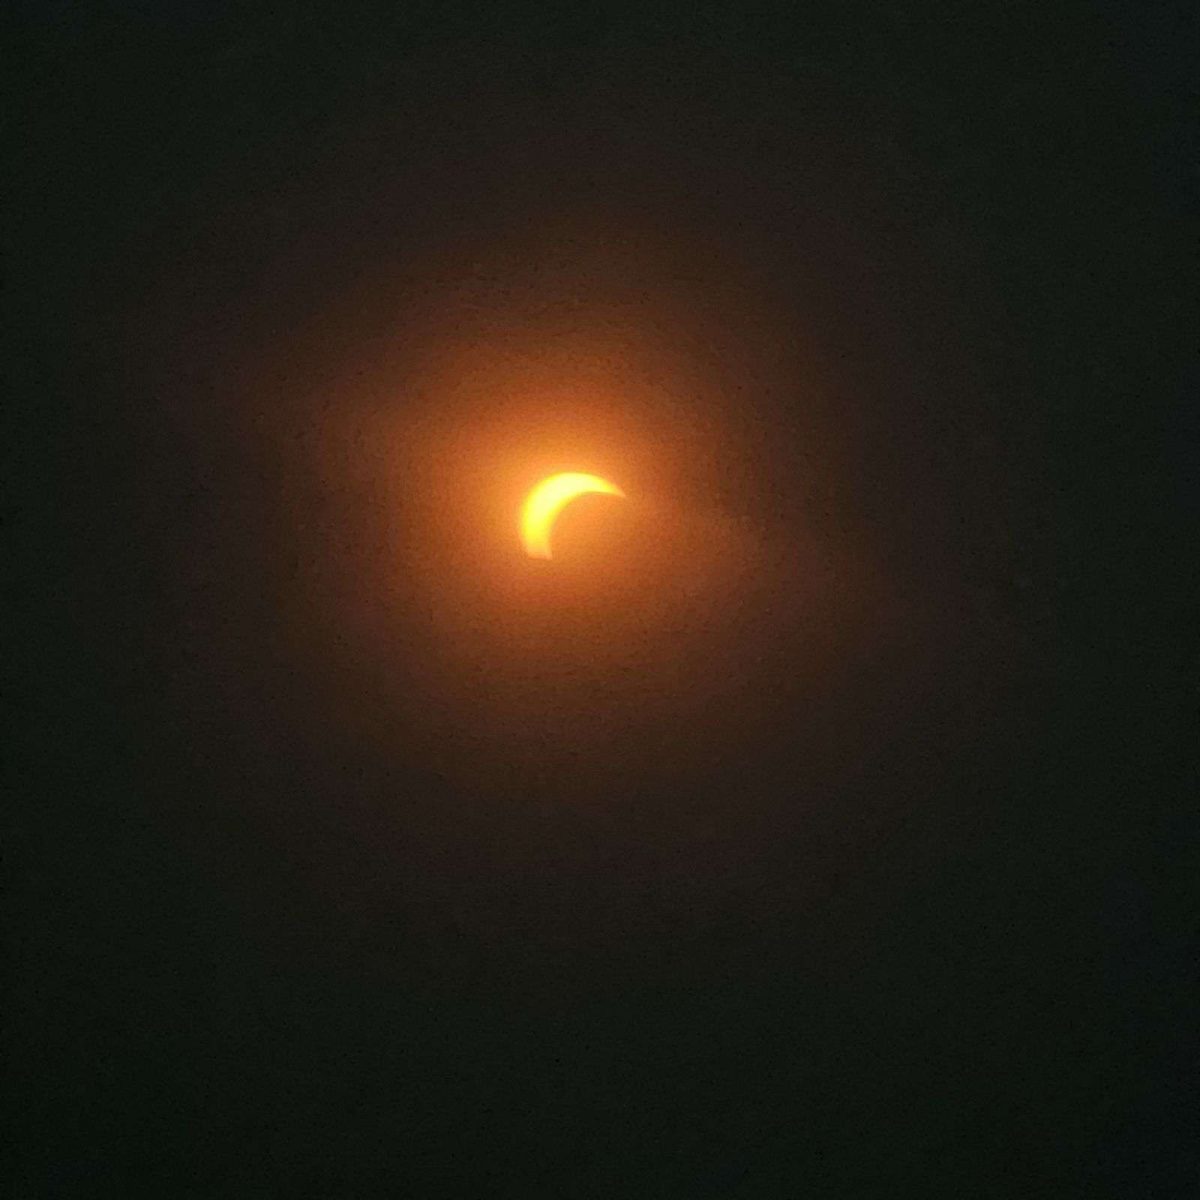 The Solar Eclipse at 1:31 p.m. in Clarkson, AR